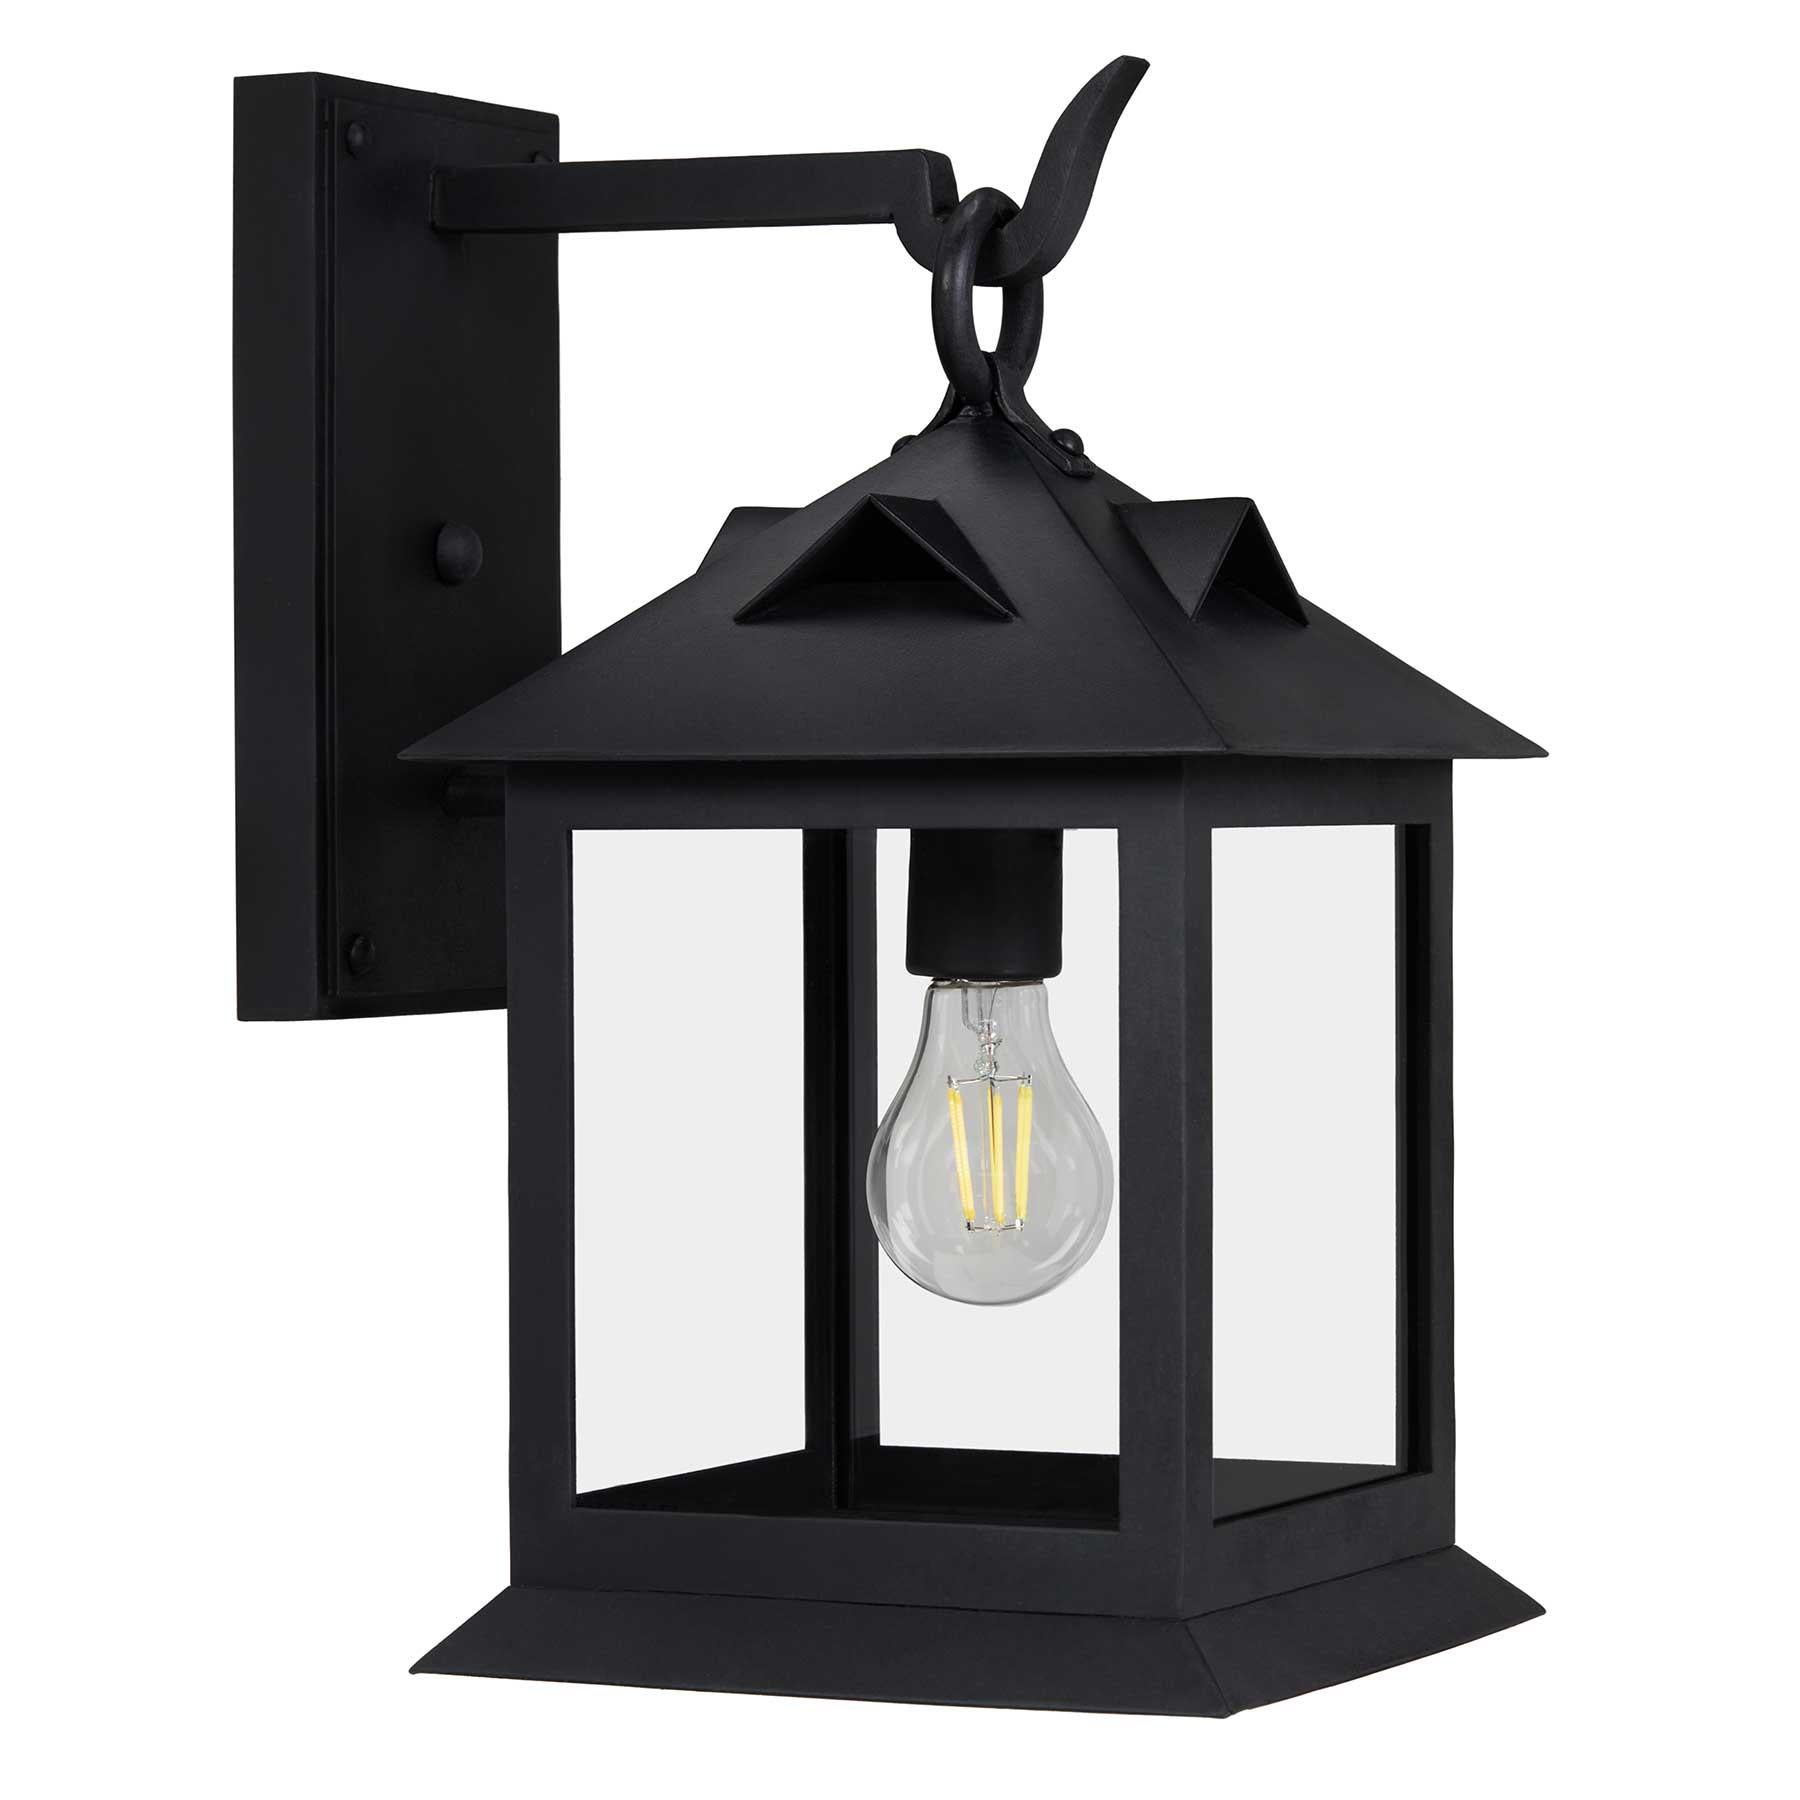 This lantern's balanced proportions perfectly blend the Spanish Colonial Revival and Craftsman movements, both popular in the early 1900s. Simple yet elegant in its design, this lantern embodies the sturdy structuring of the Craftsman cottage,